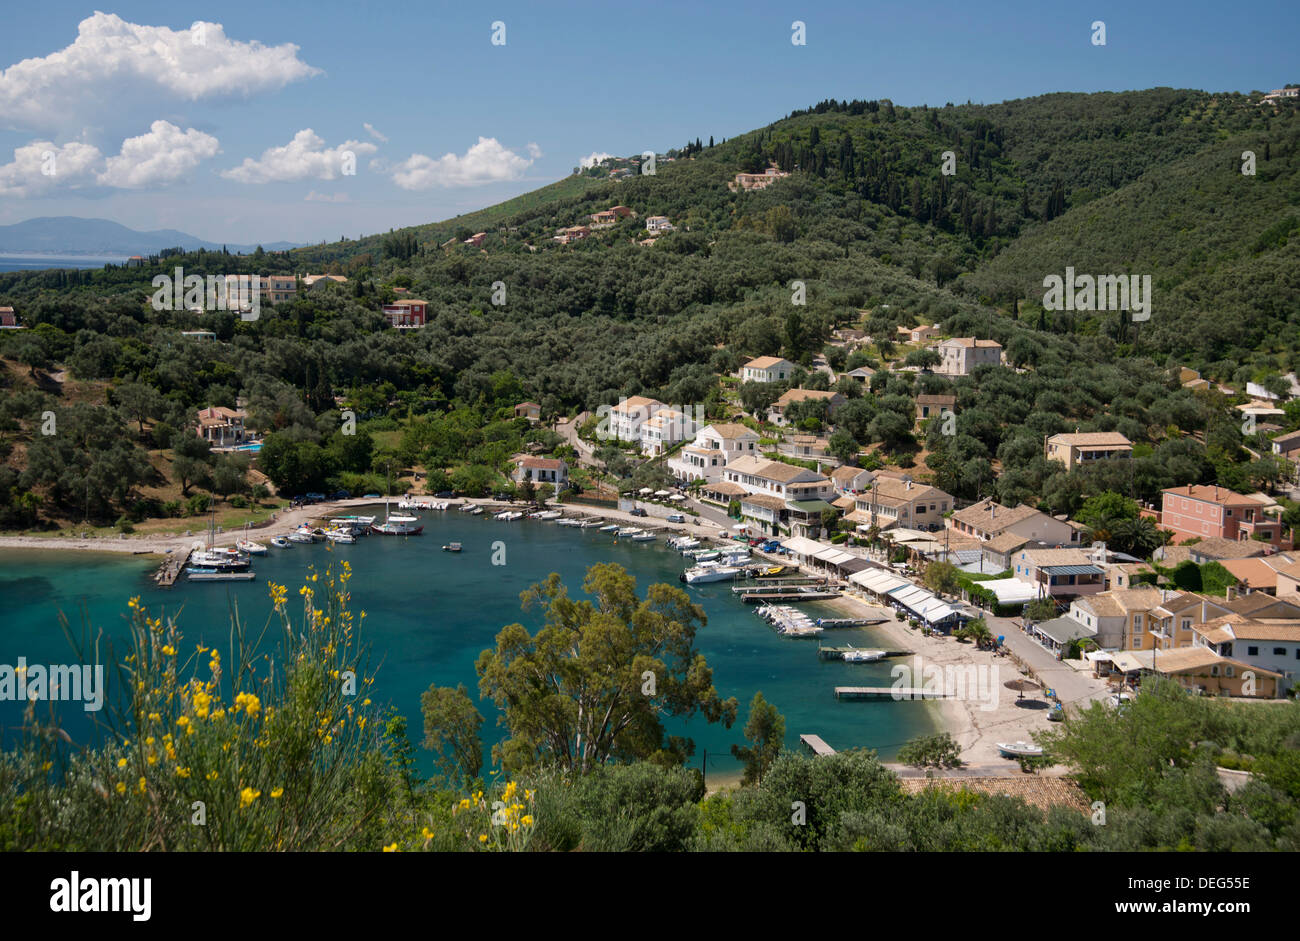 An aerial view of the town of Agios Stefanos on the northeast coast of the island of Corfu, Greek Islands, Greece, Europe Stock Photo